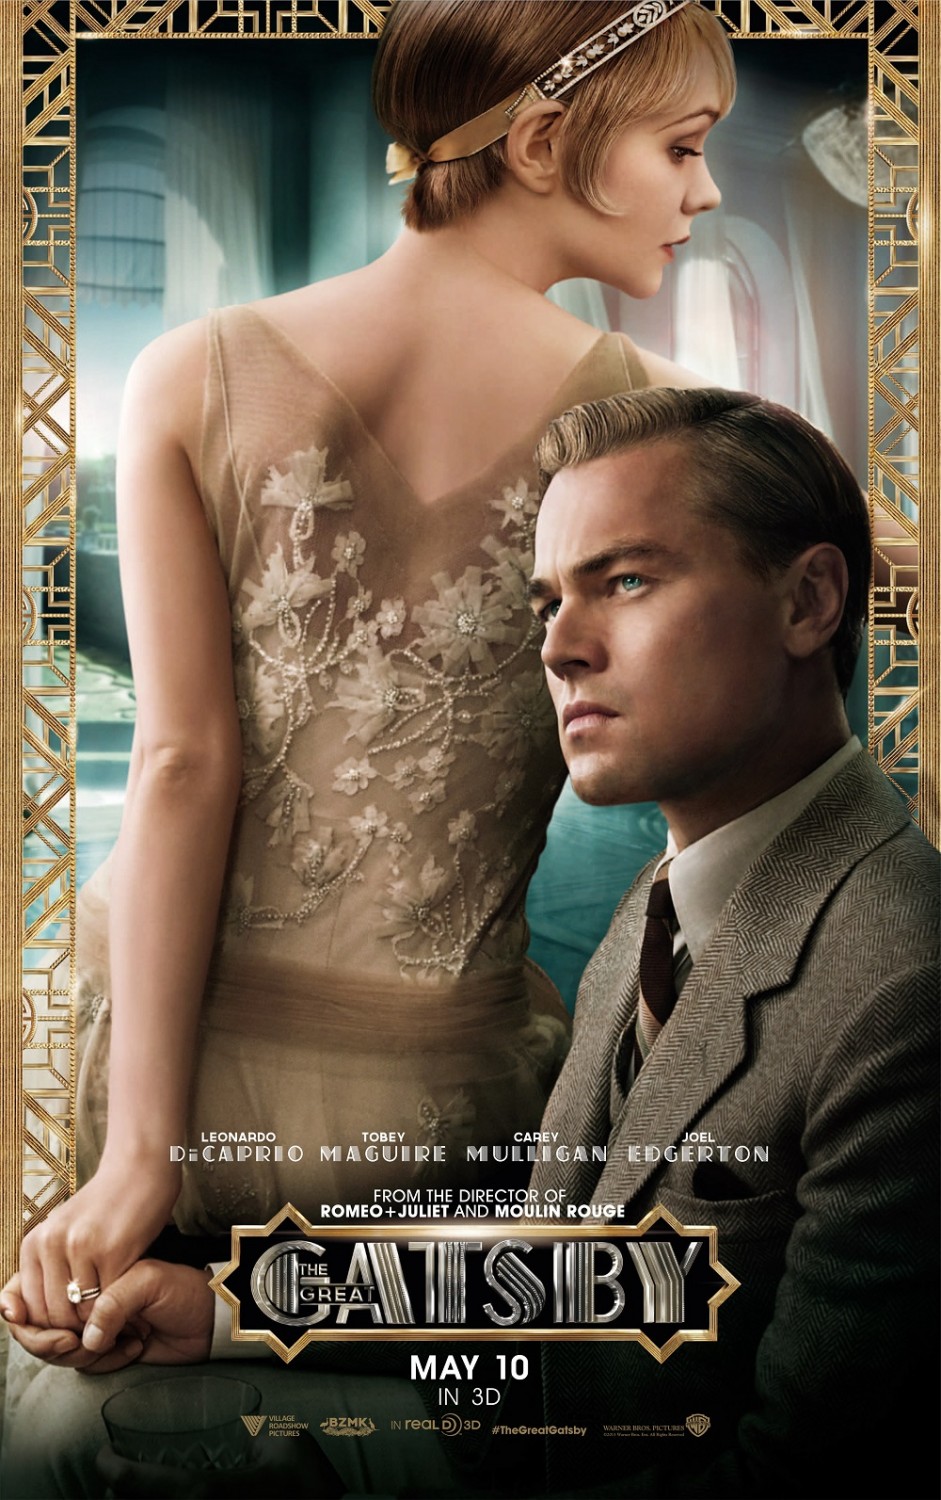 Best Summary and Analysis: The Great Gatsby